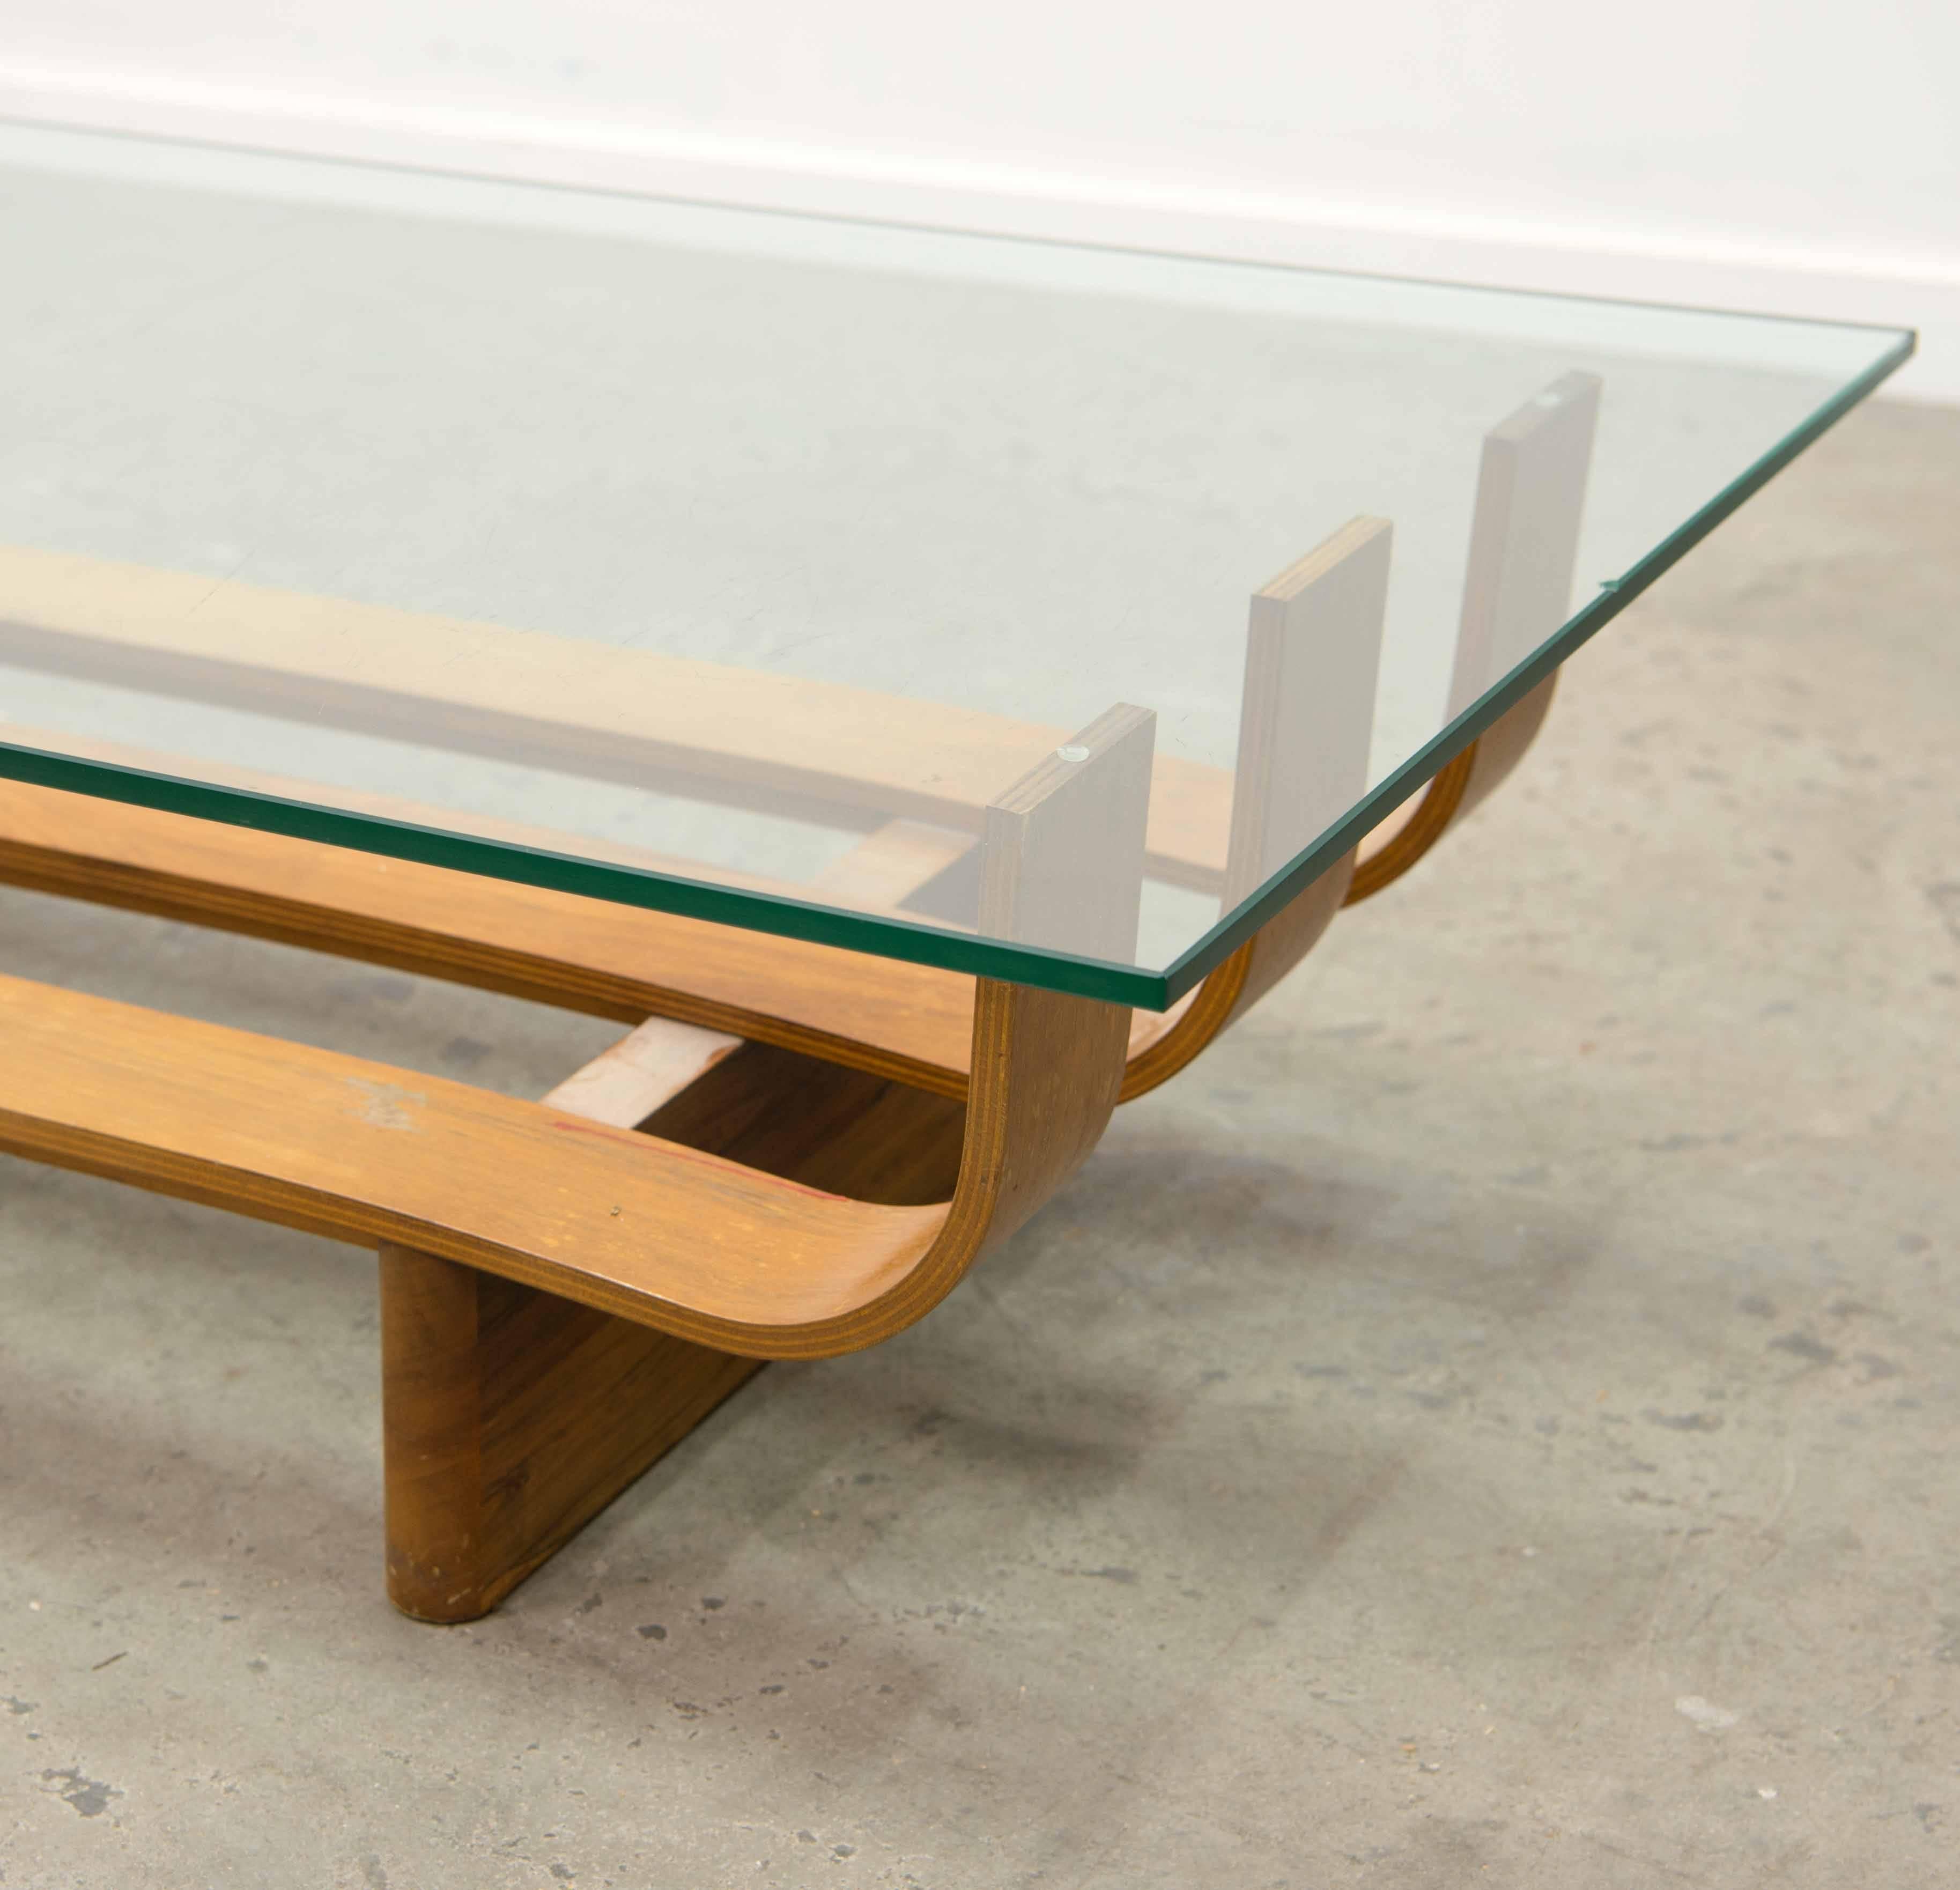 Mid-Century Modern Plywood and Glass Coffee Salon table made by Ilse Möbel in Denmark, circa 1970